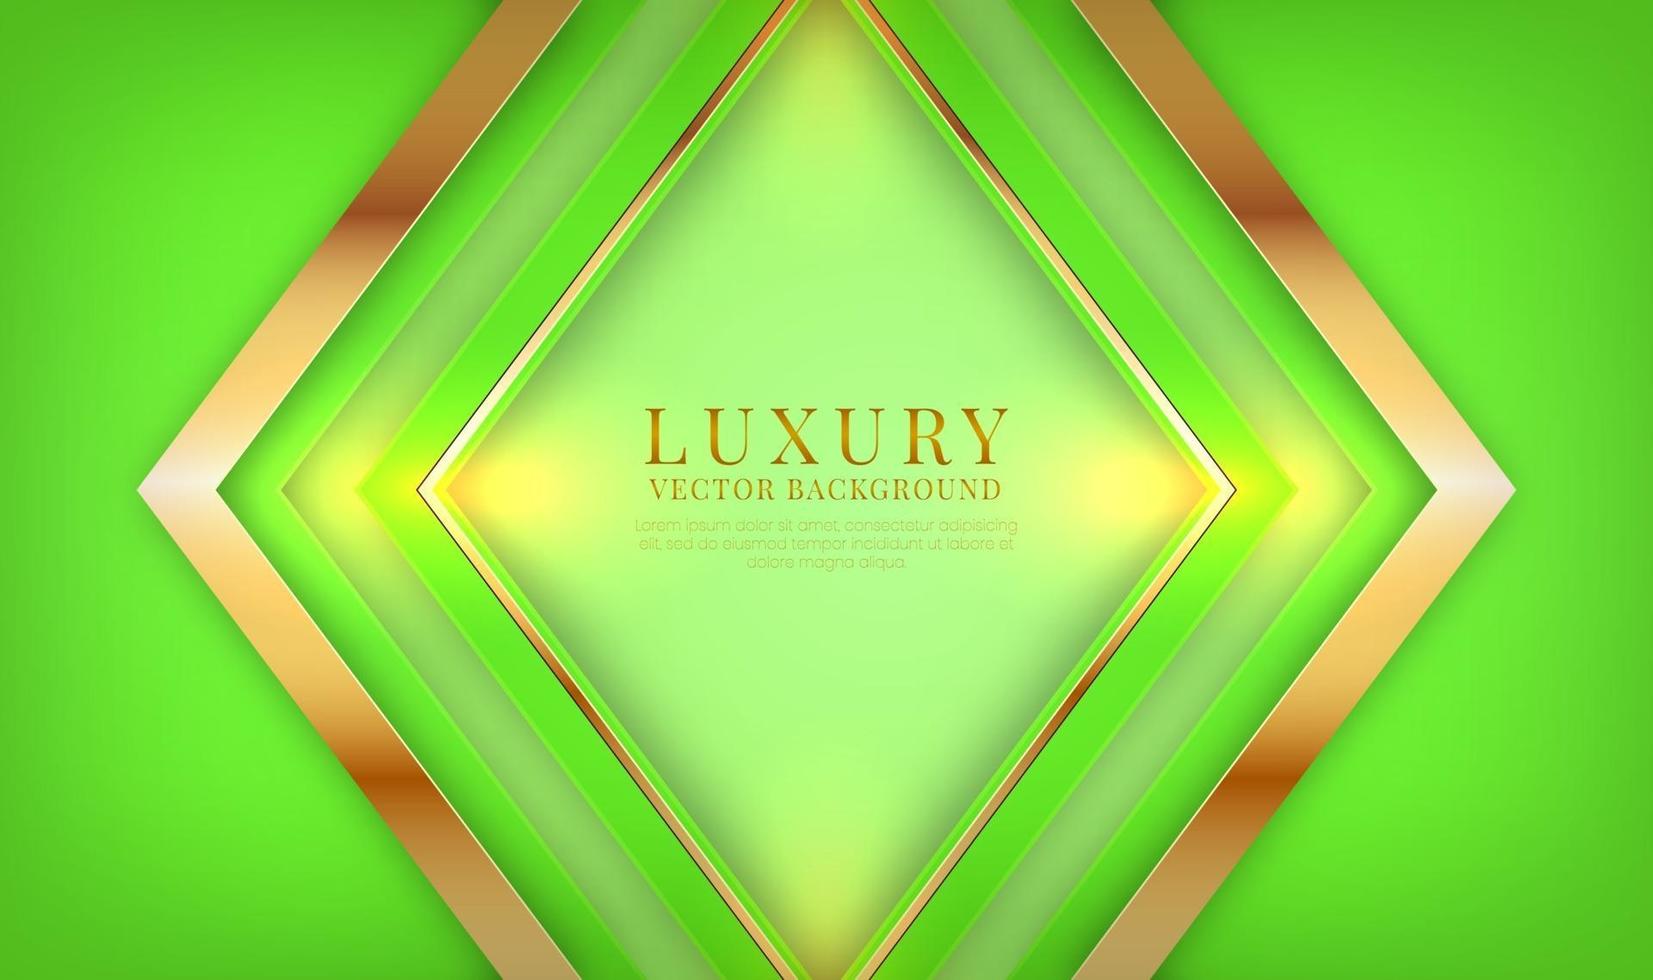 Abstract 3D green luxury background overlap layer on bright space with golden lines metallic decoration. Modern graphic design template elements for flyer, card, cover, brochure, or landing page vector